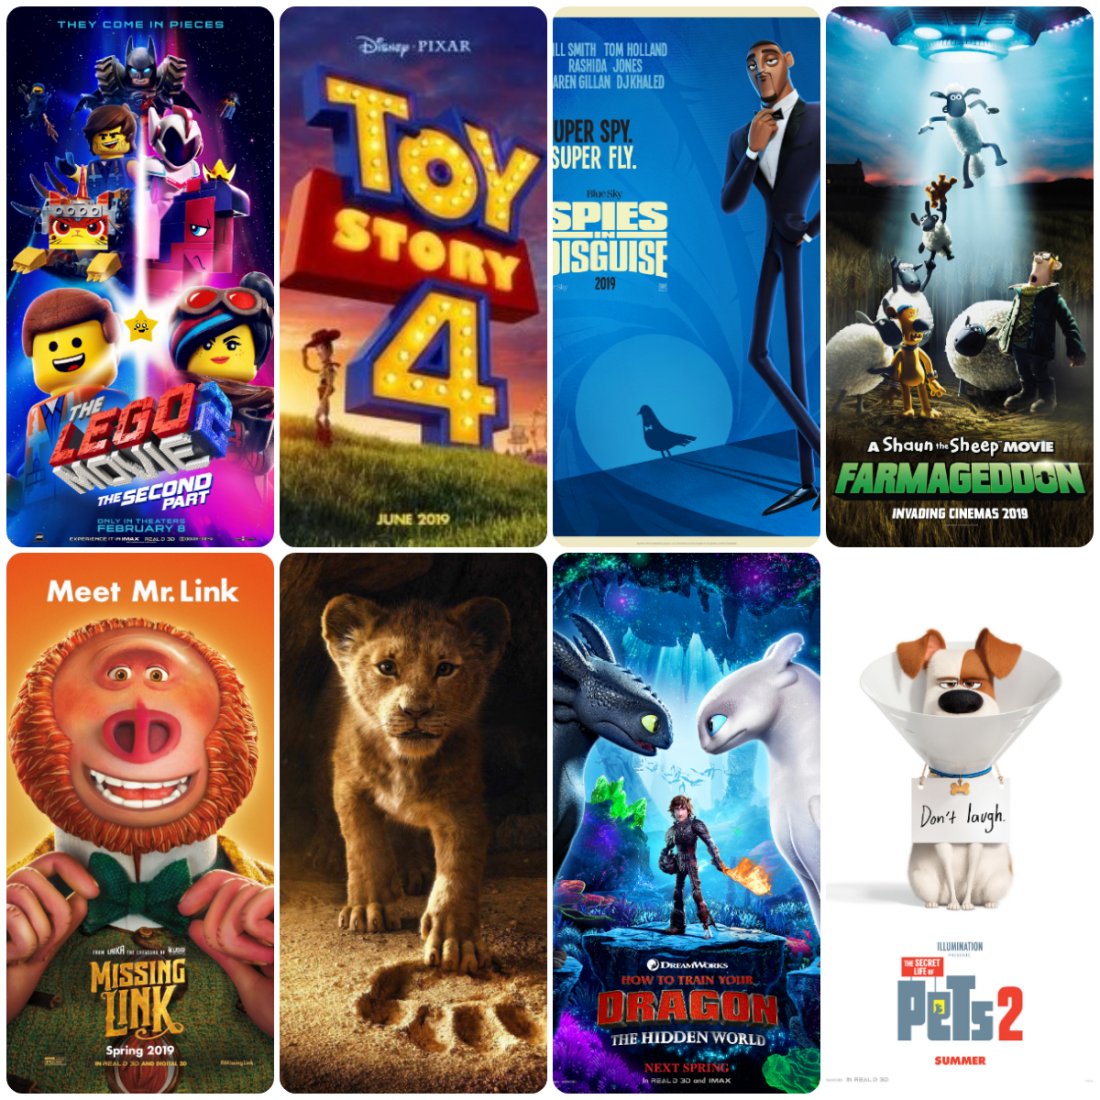 Feature animated films 2019 - Focus on - Animation World